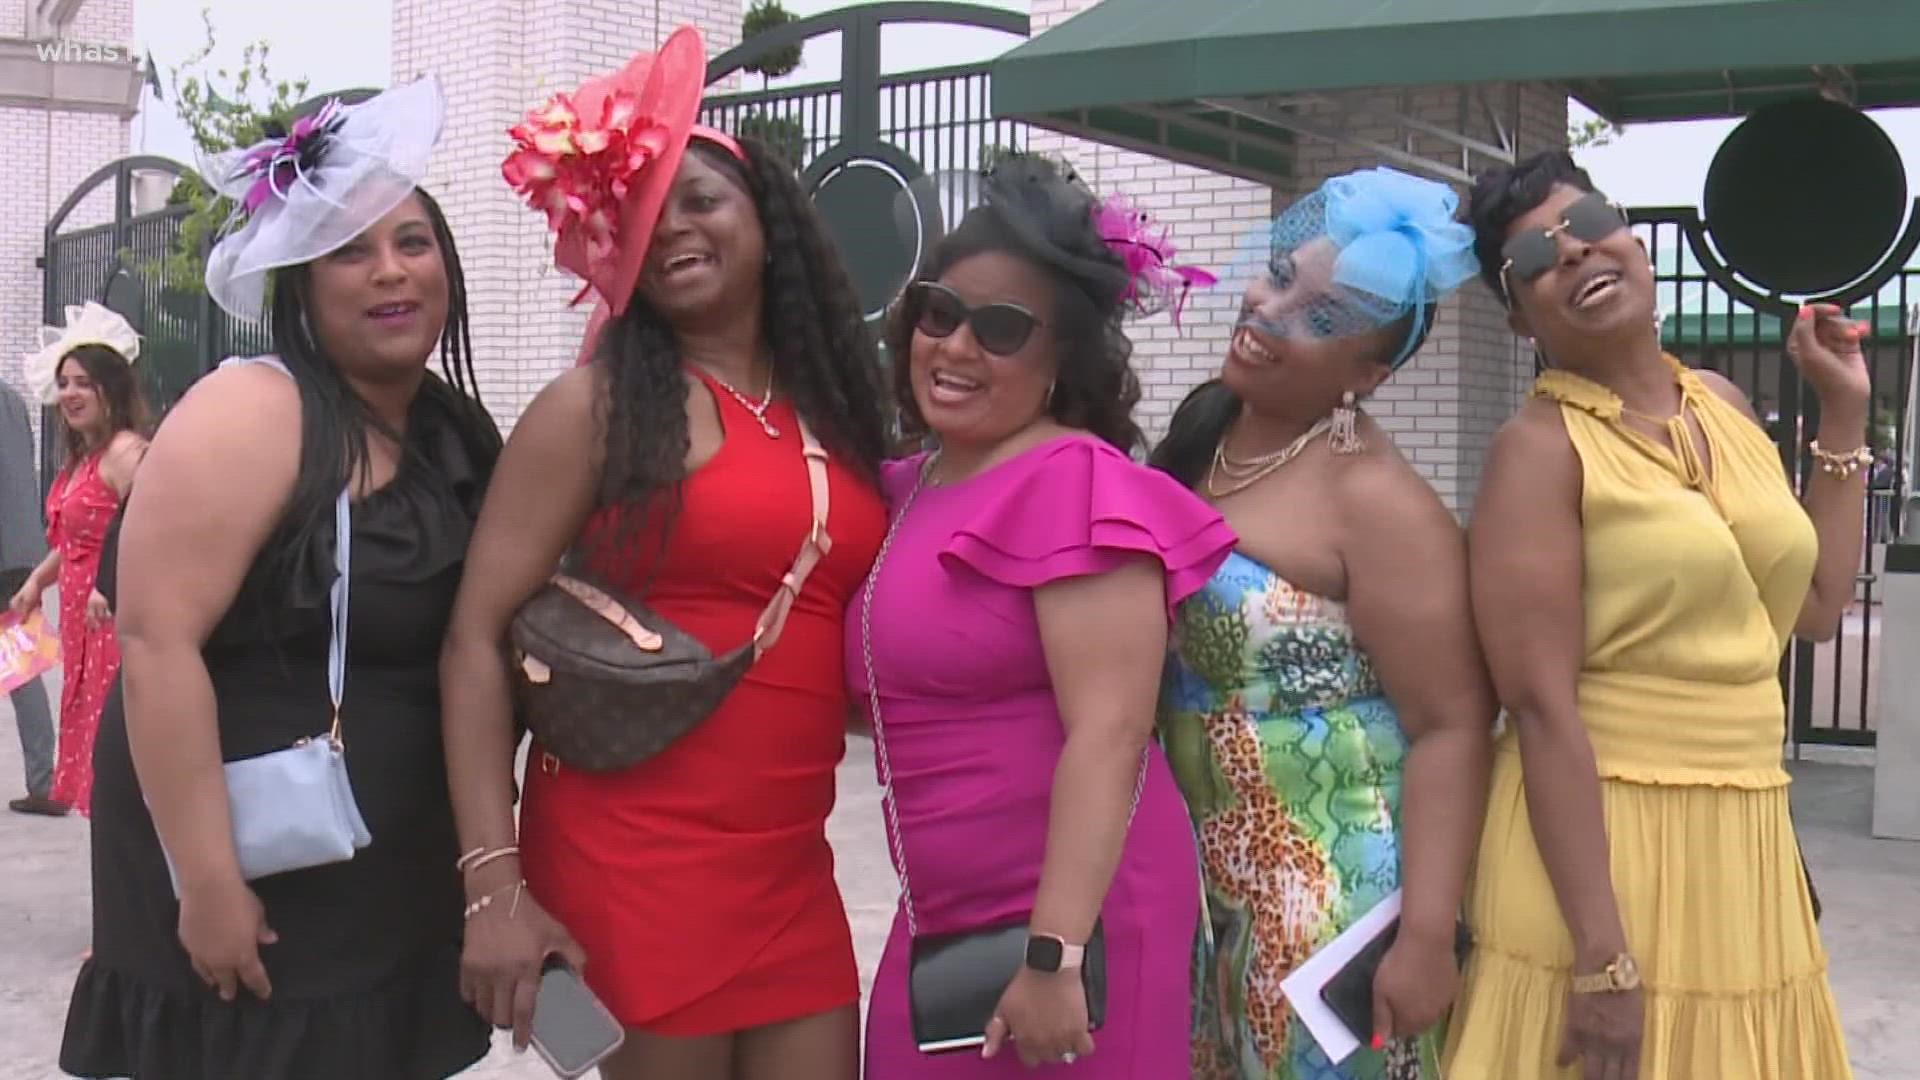 Over 47,000 people went to Churchill Downs to celebrate Thurby ahead of Derby weekend.